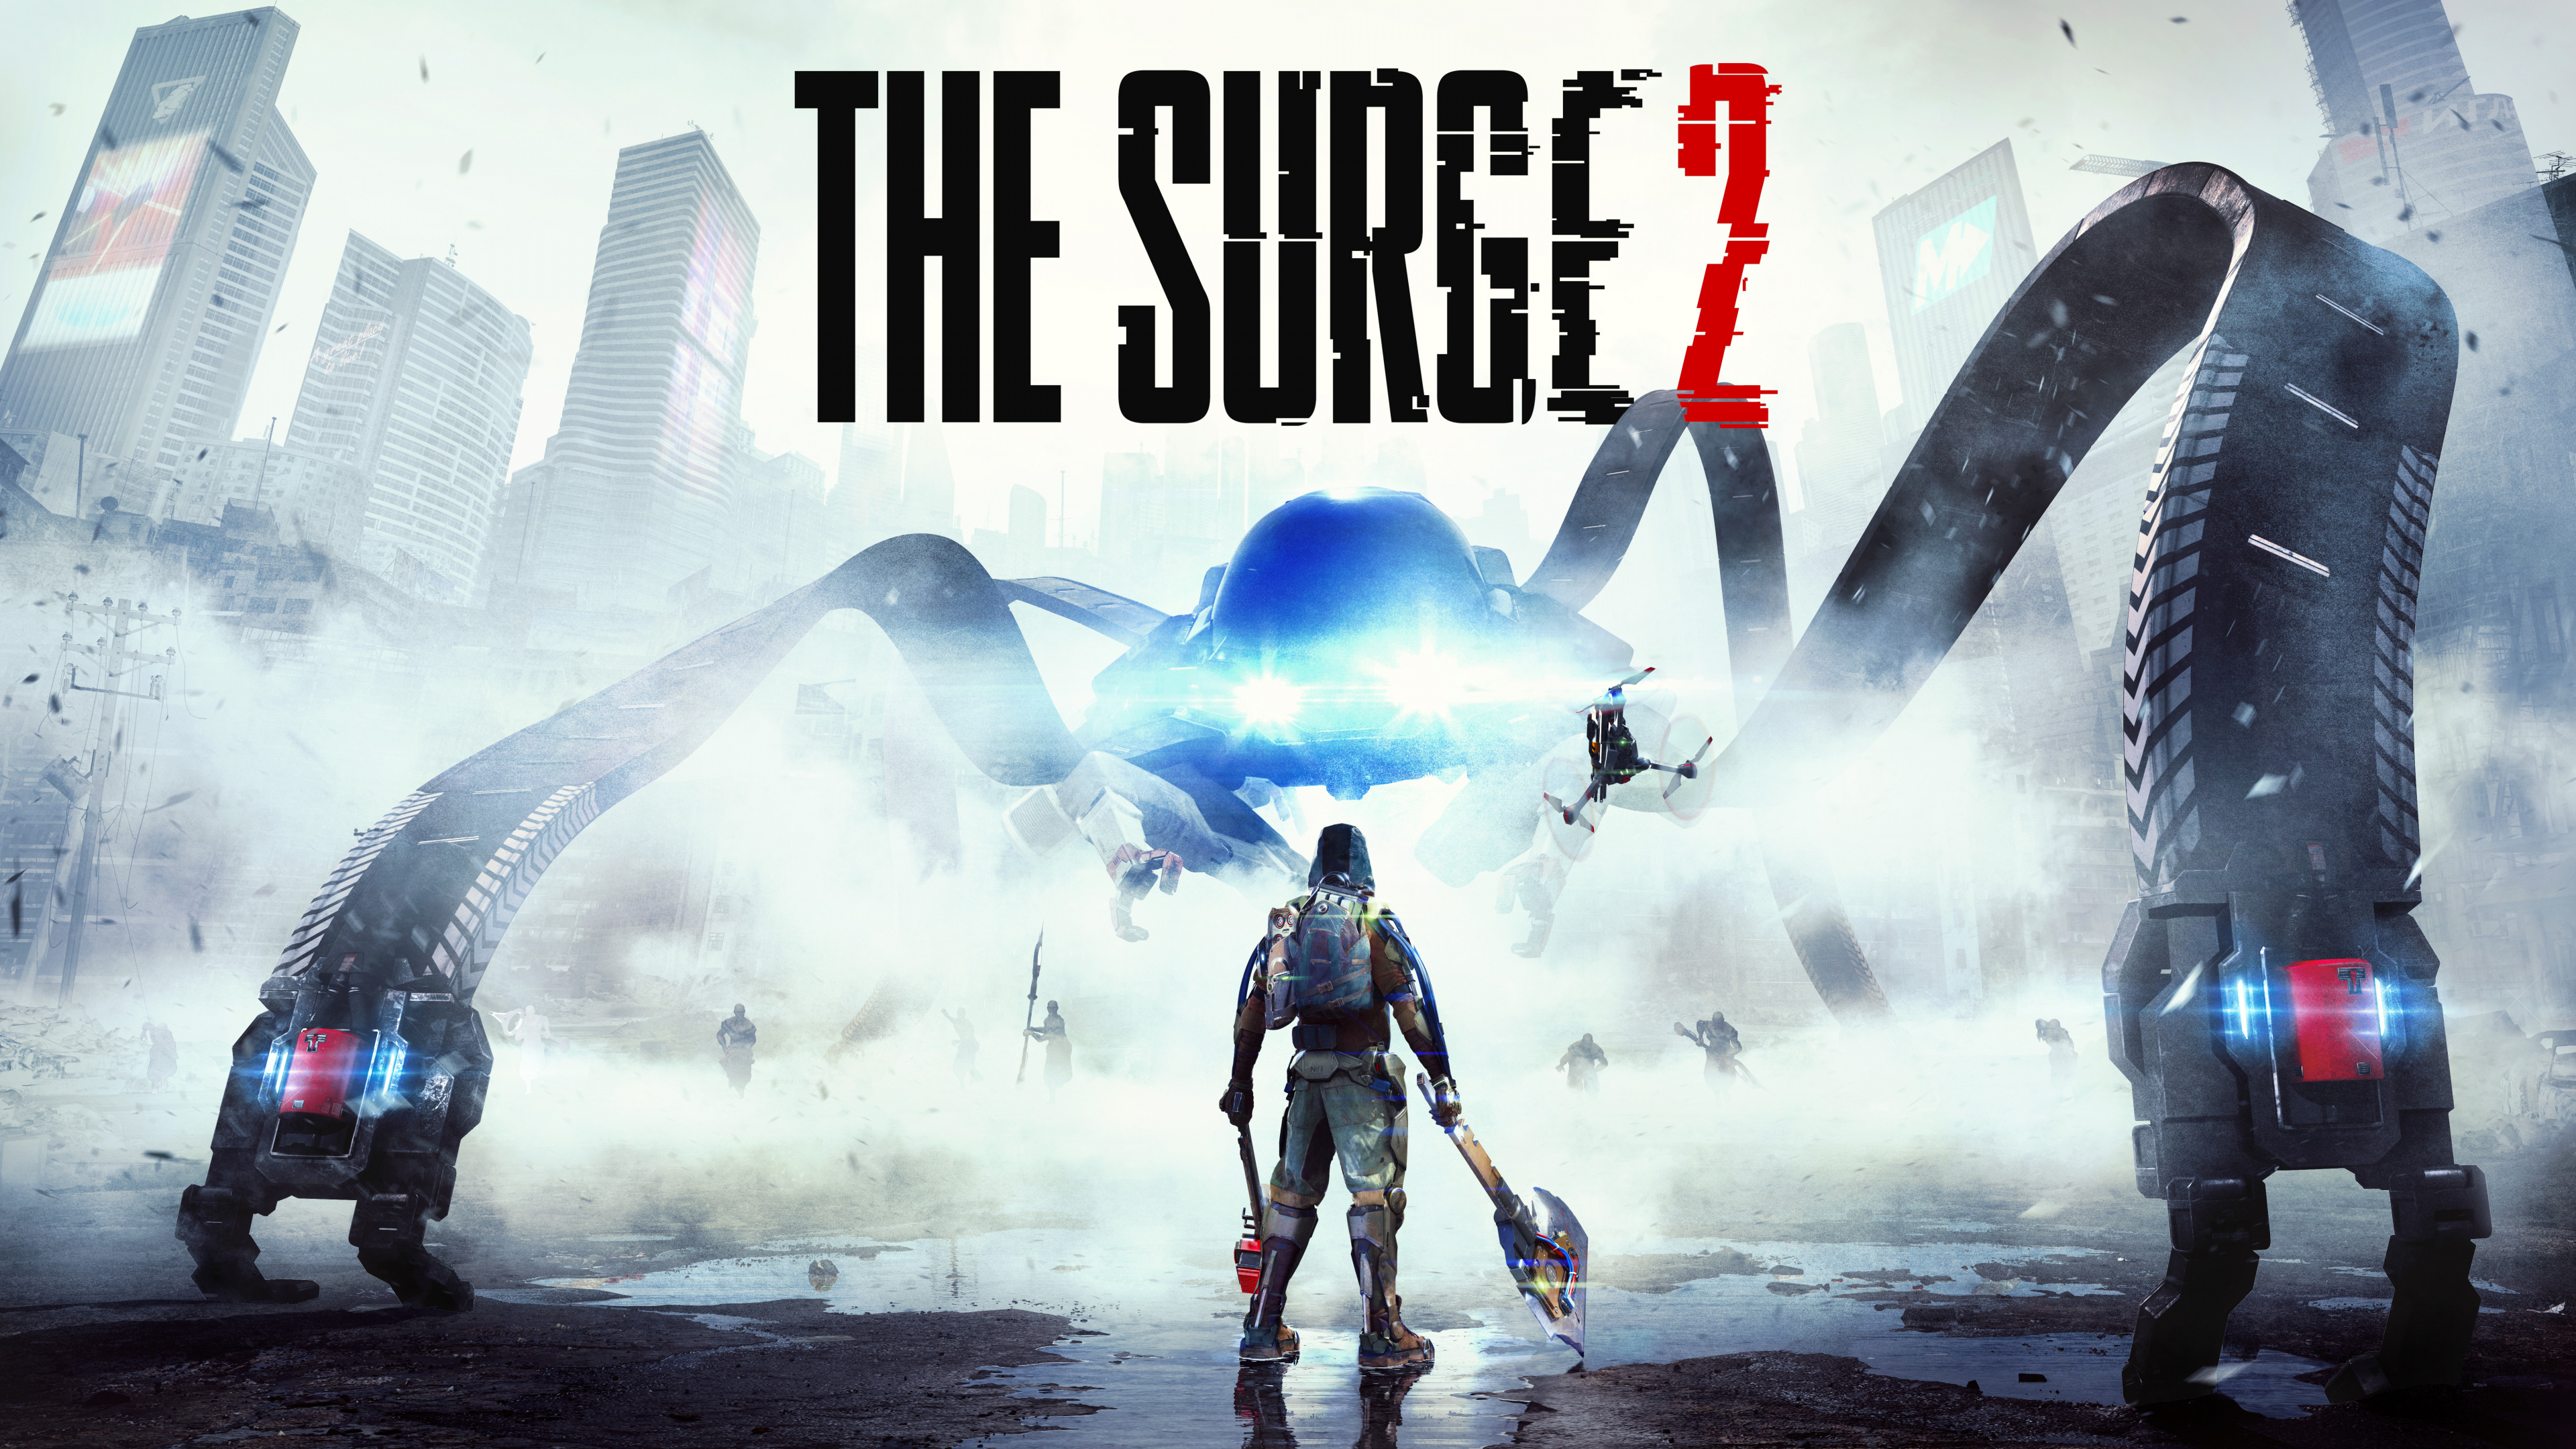 The Surge 2, The Surge, Deck13, Focus Home Interactive, Playstation 4. Wallpaper in 3840x2160 Resolution